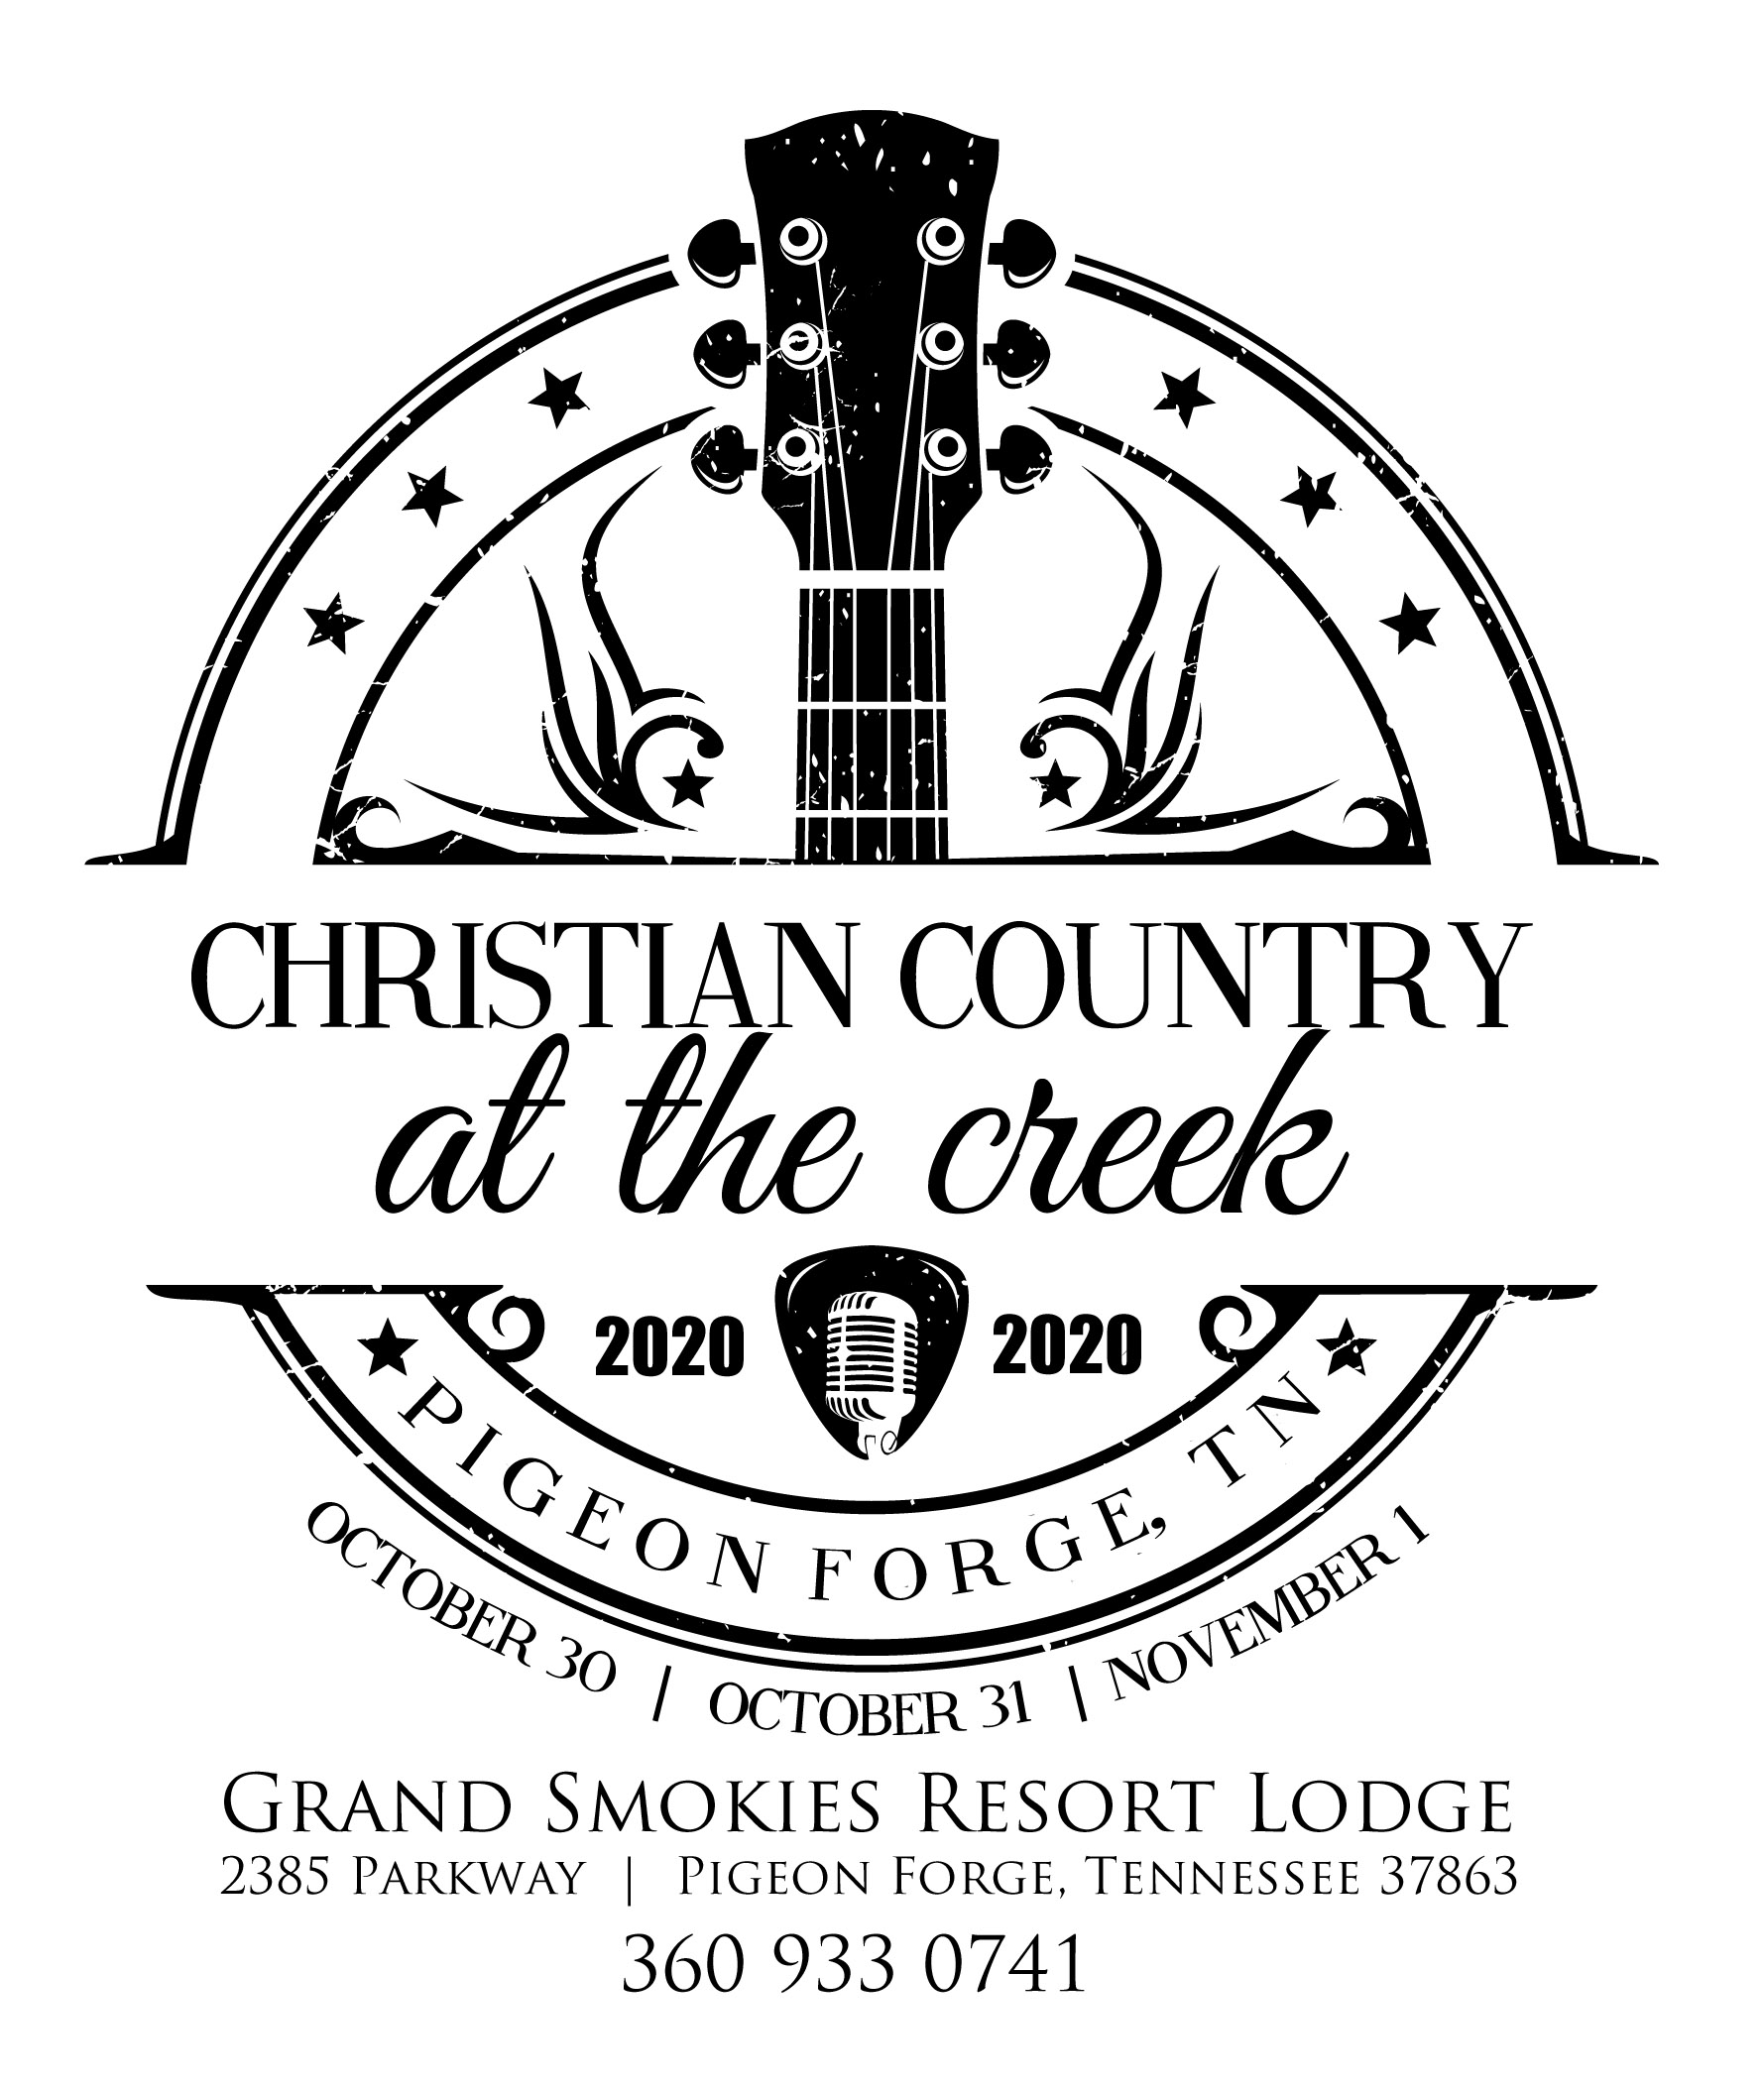 Christian Country At The Creek Returns To Pigeon Forge In 2020